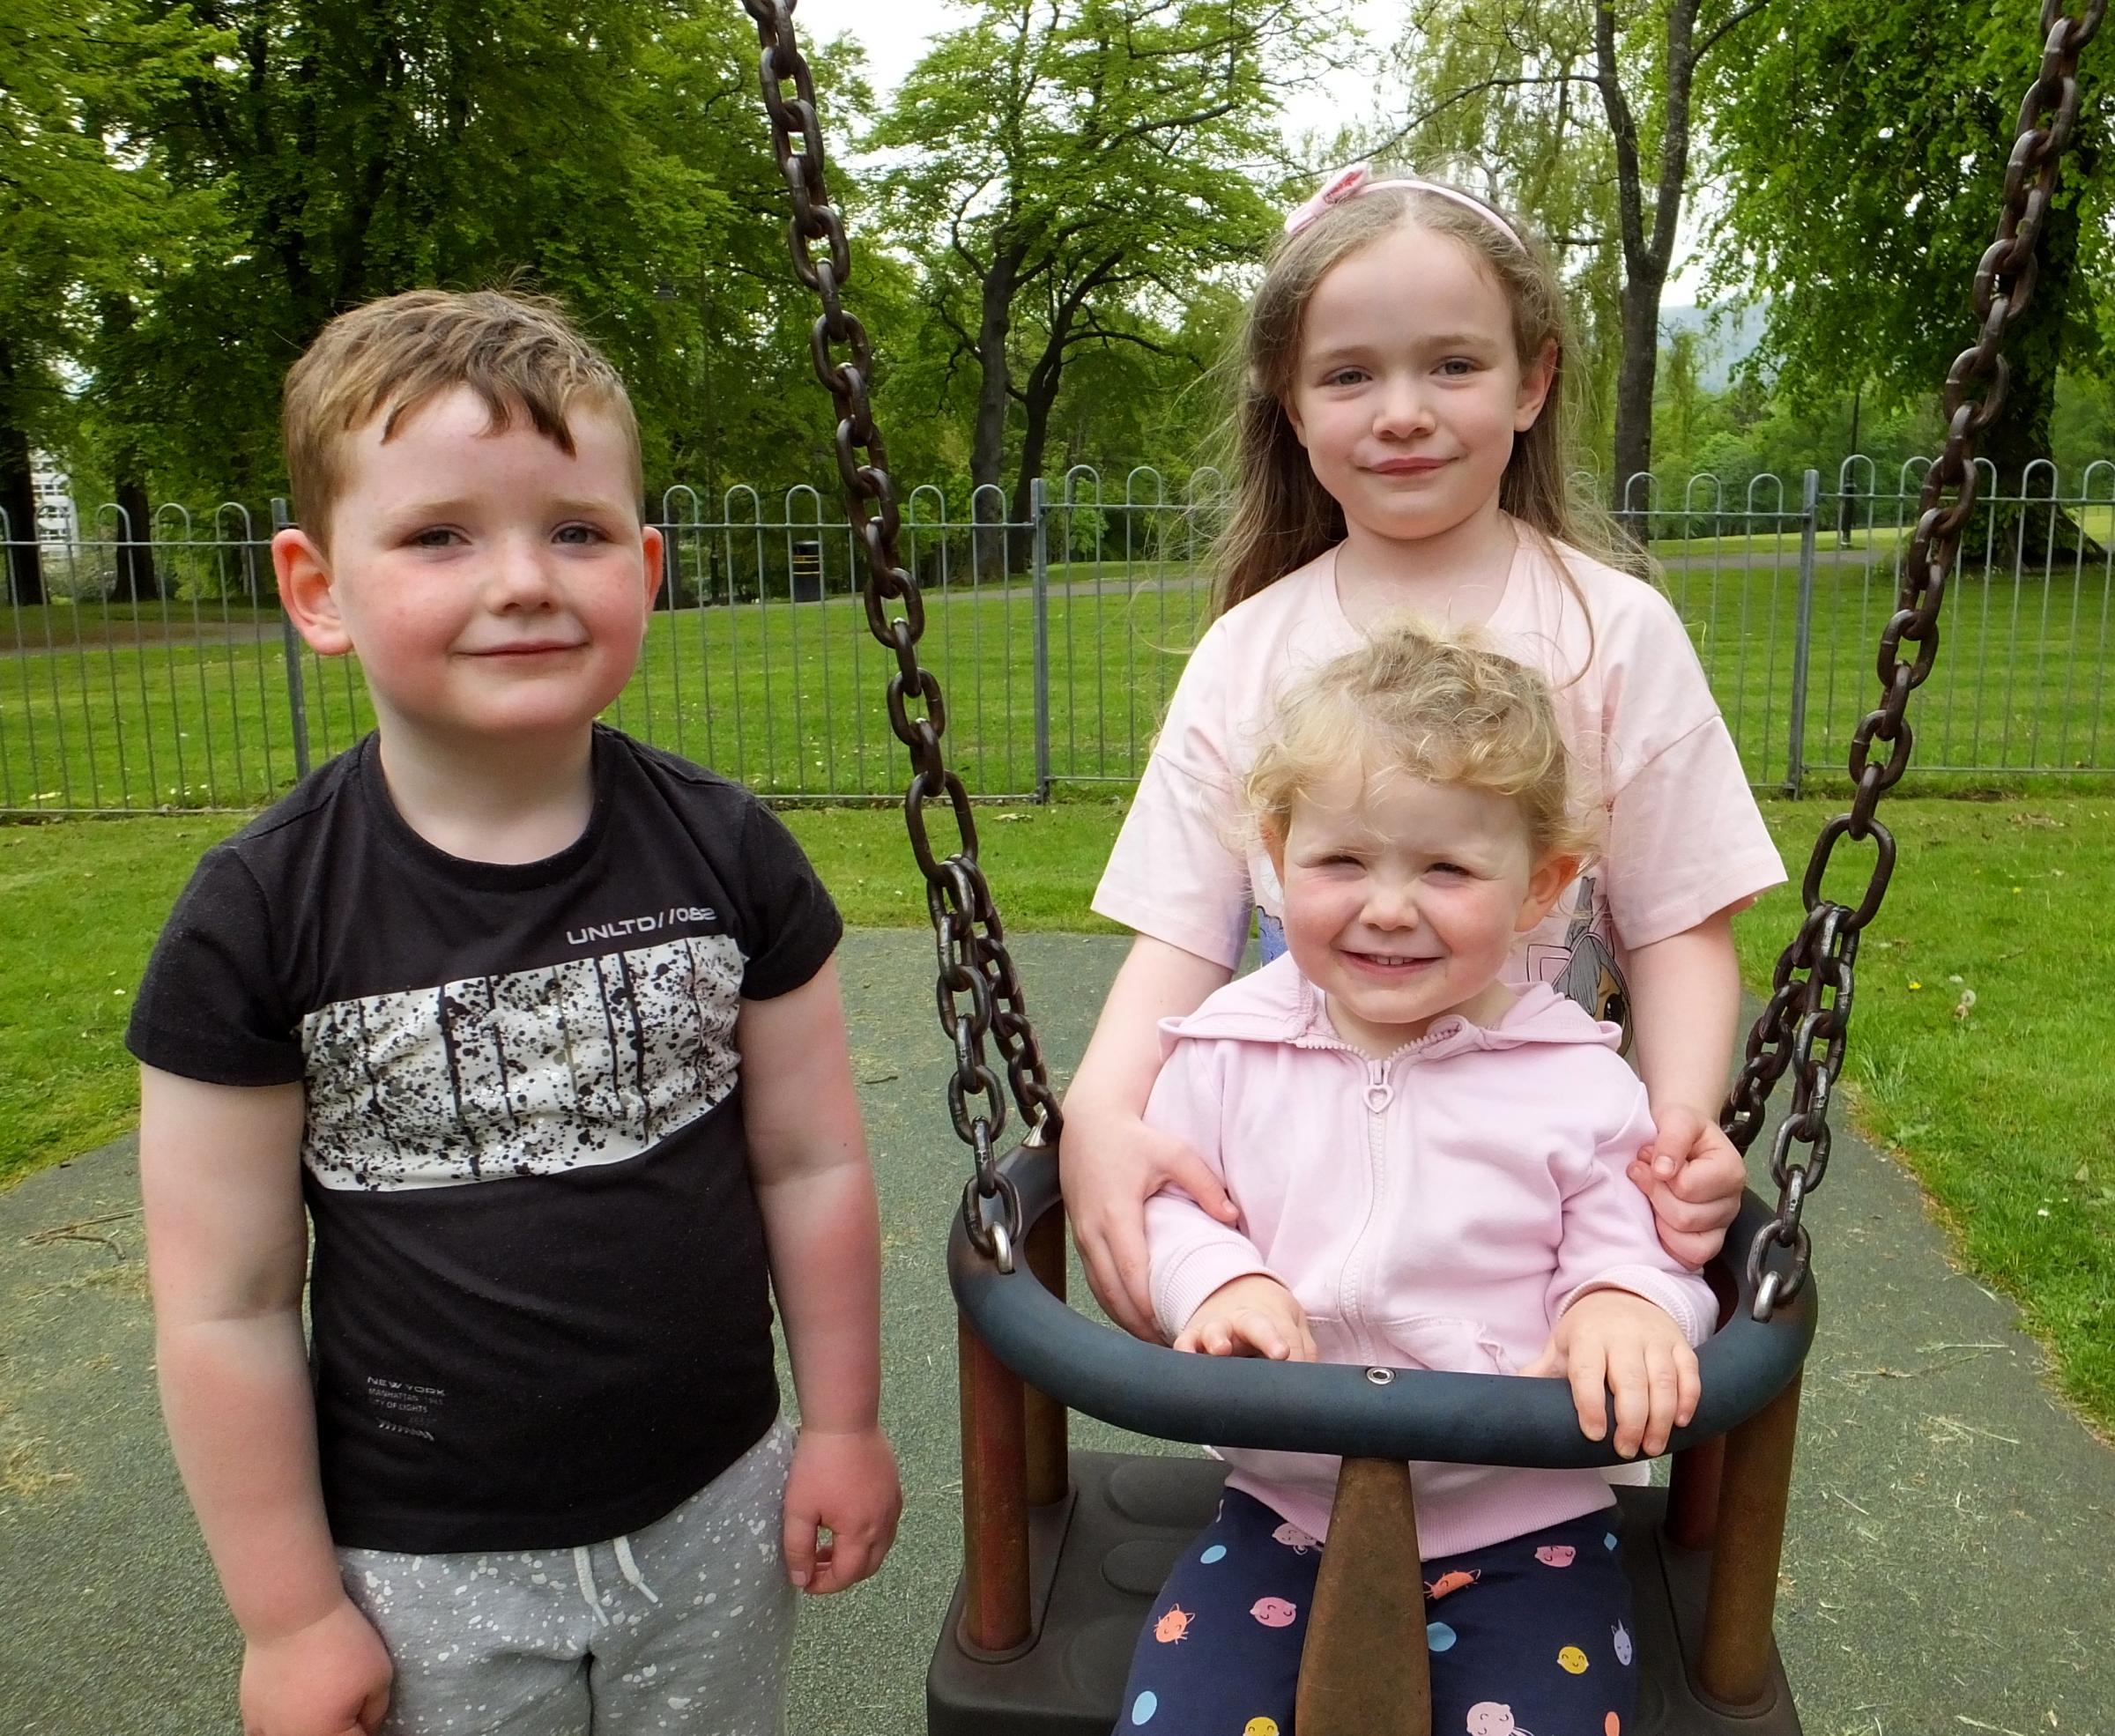 Zach and Cora Gallagher and Mailli Coats at Dalmuir Park